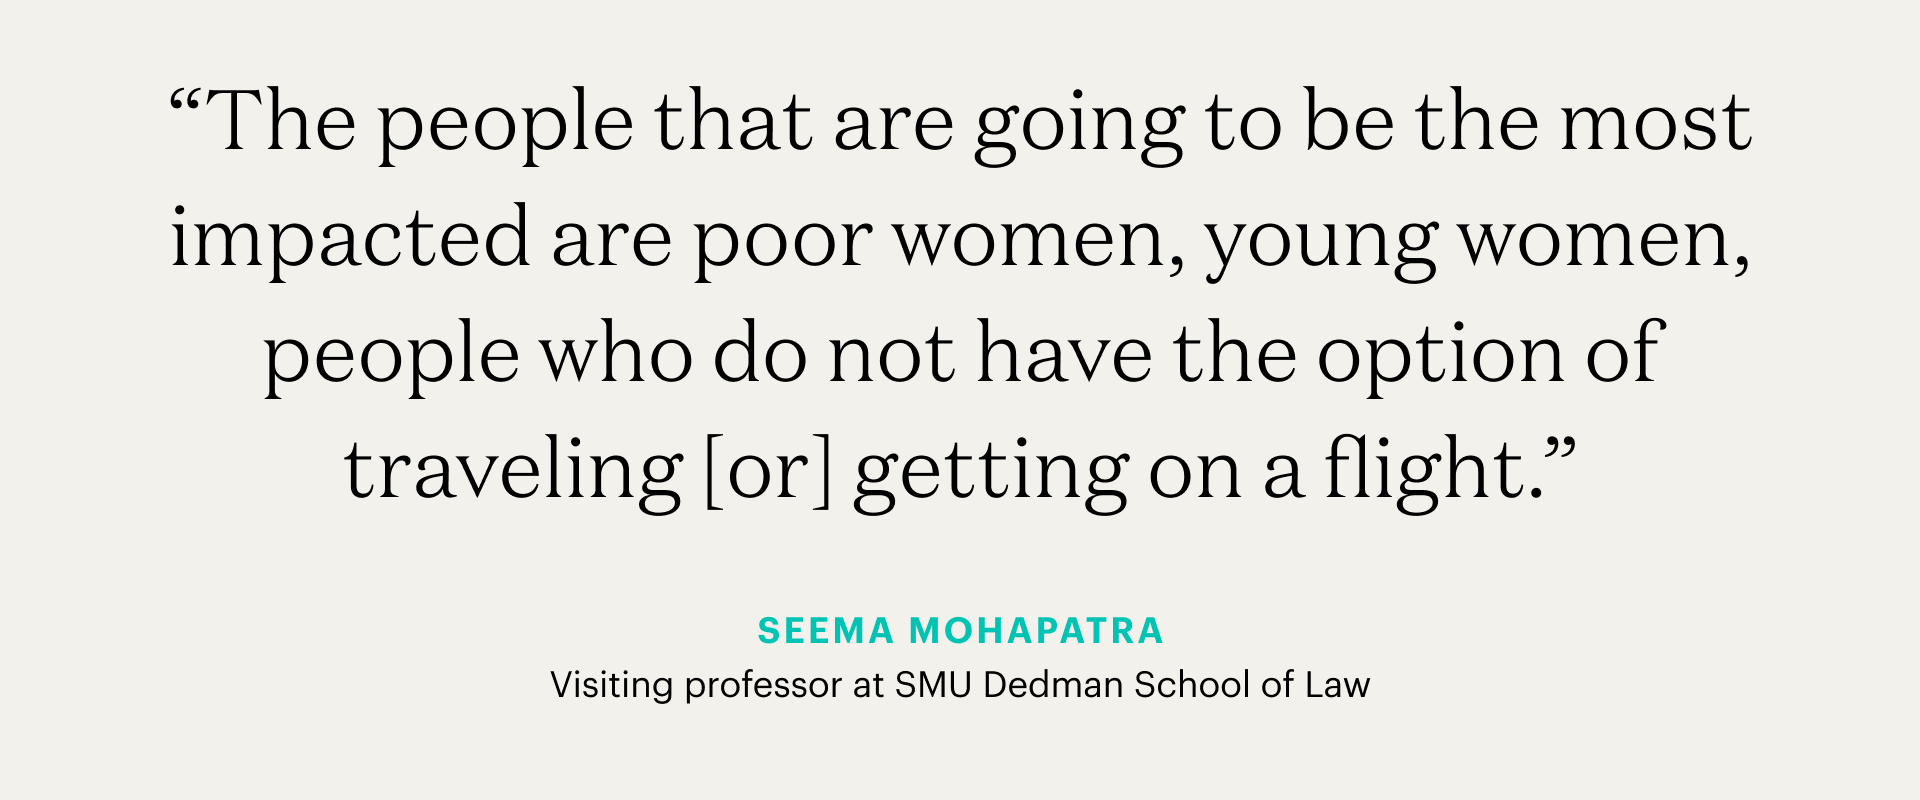 A quote from legal expert Seema Mohapatra